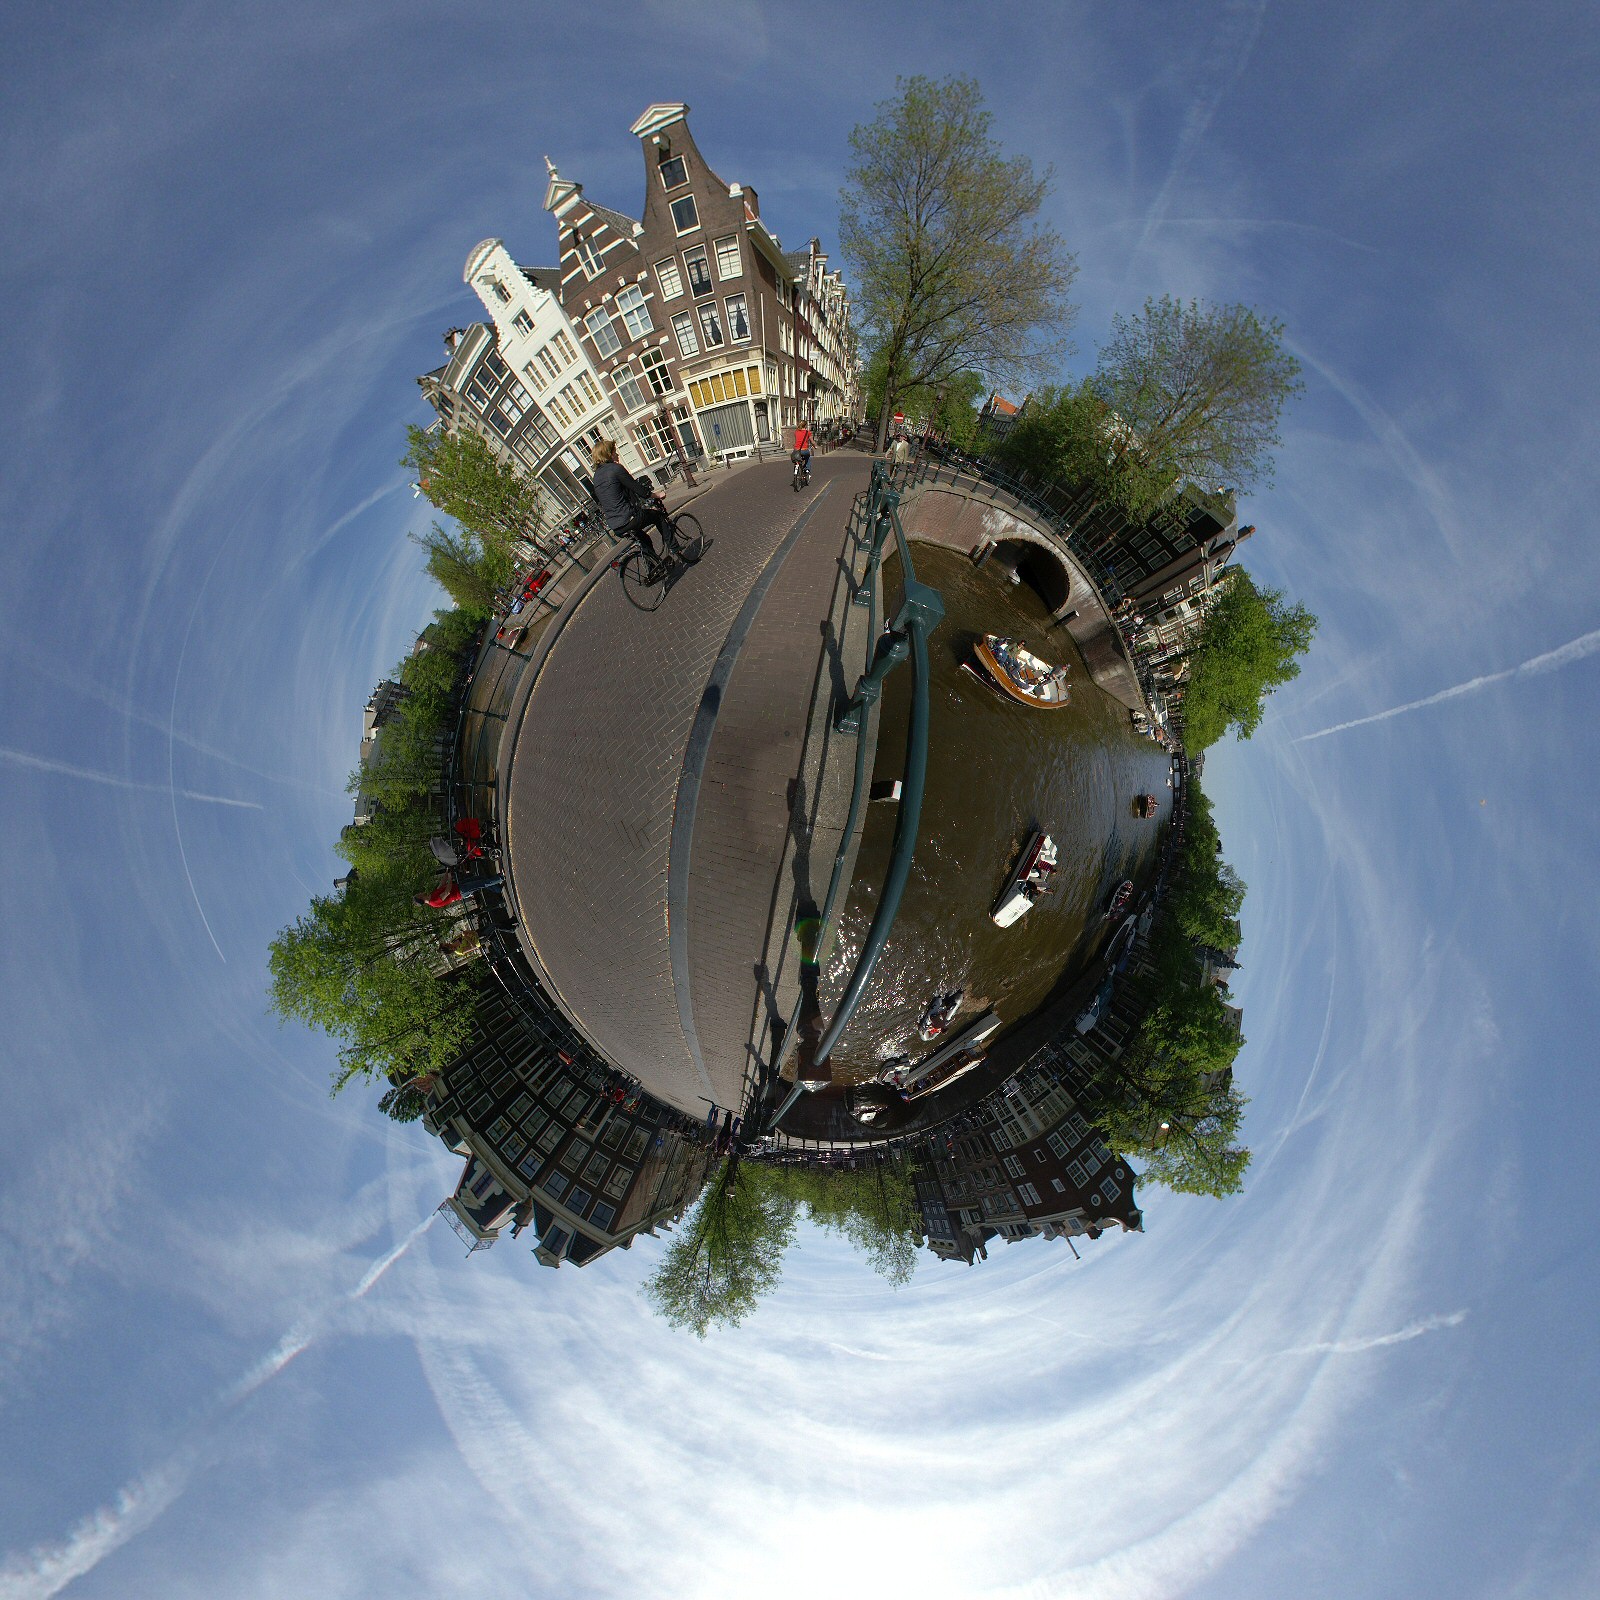 20070429_Amsterdam_pano5_canals_StereoGraphic260rot90_1600x1600_sh0.5-50.jpg